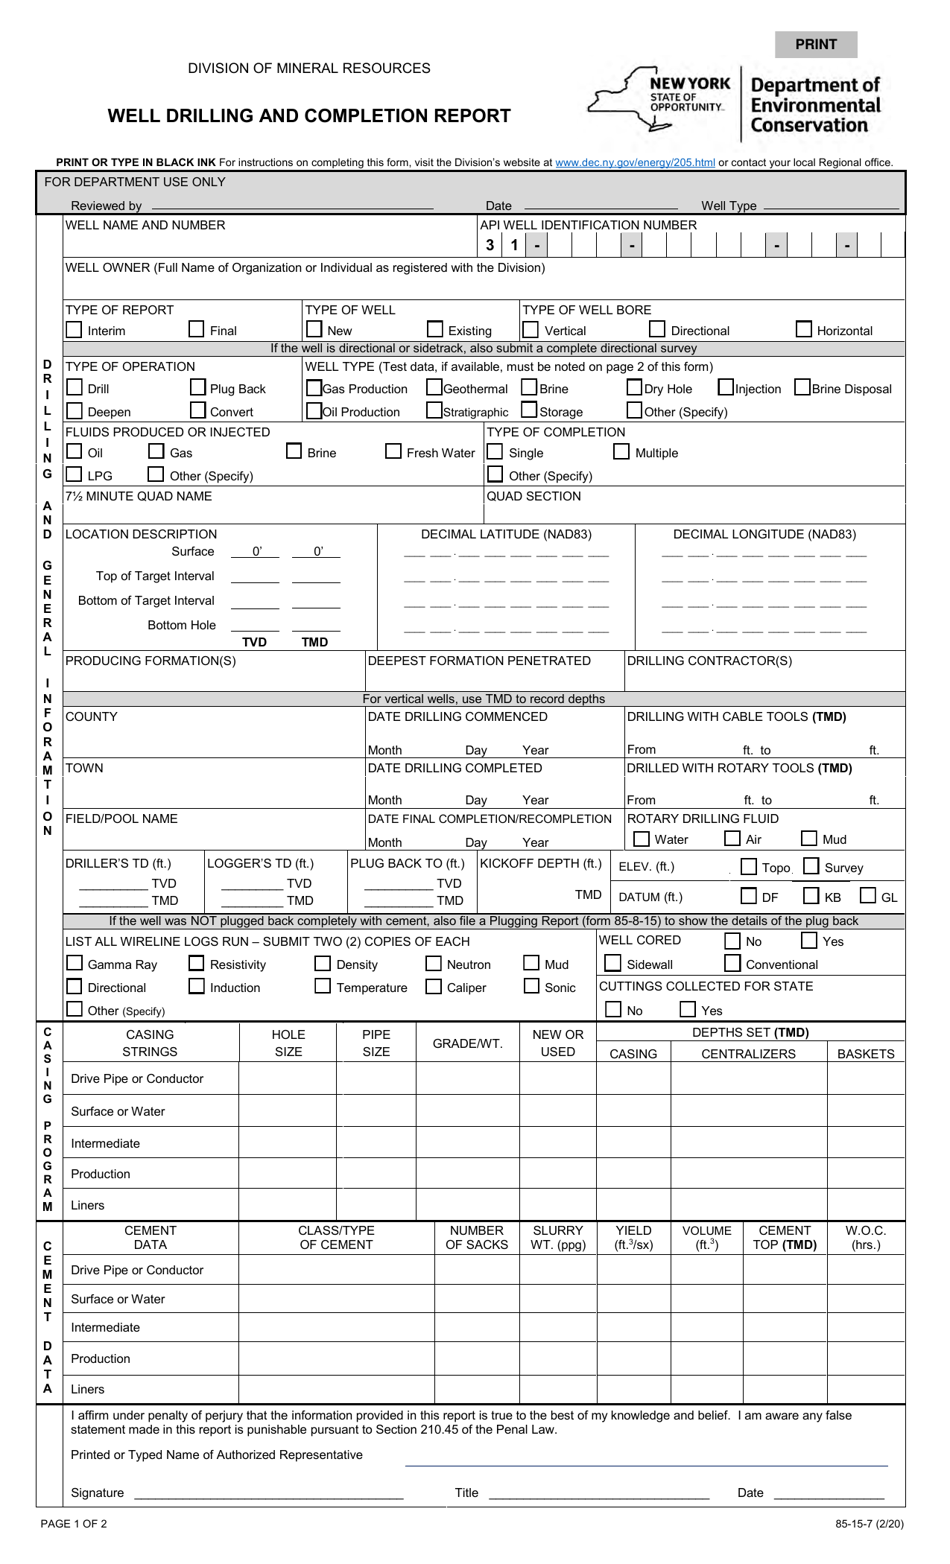 Form 85-15-7 Well Drilling and Completion Report - New York, Page 1